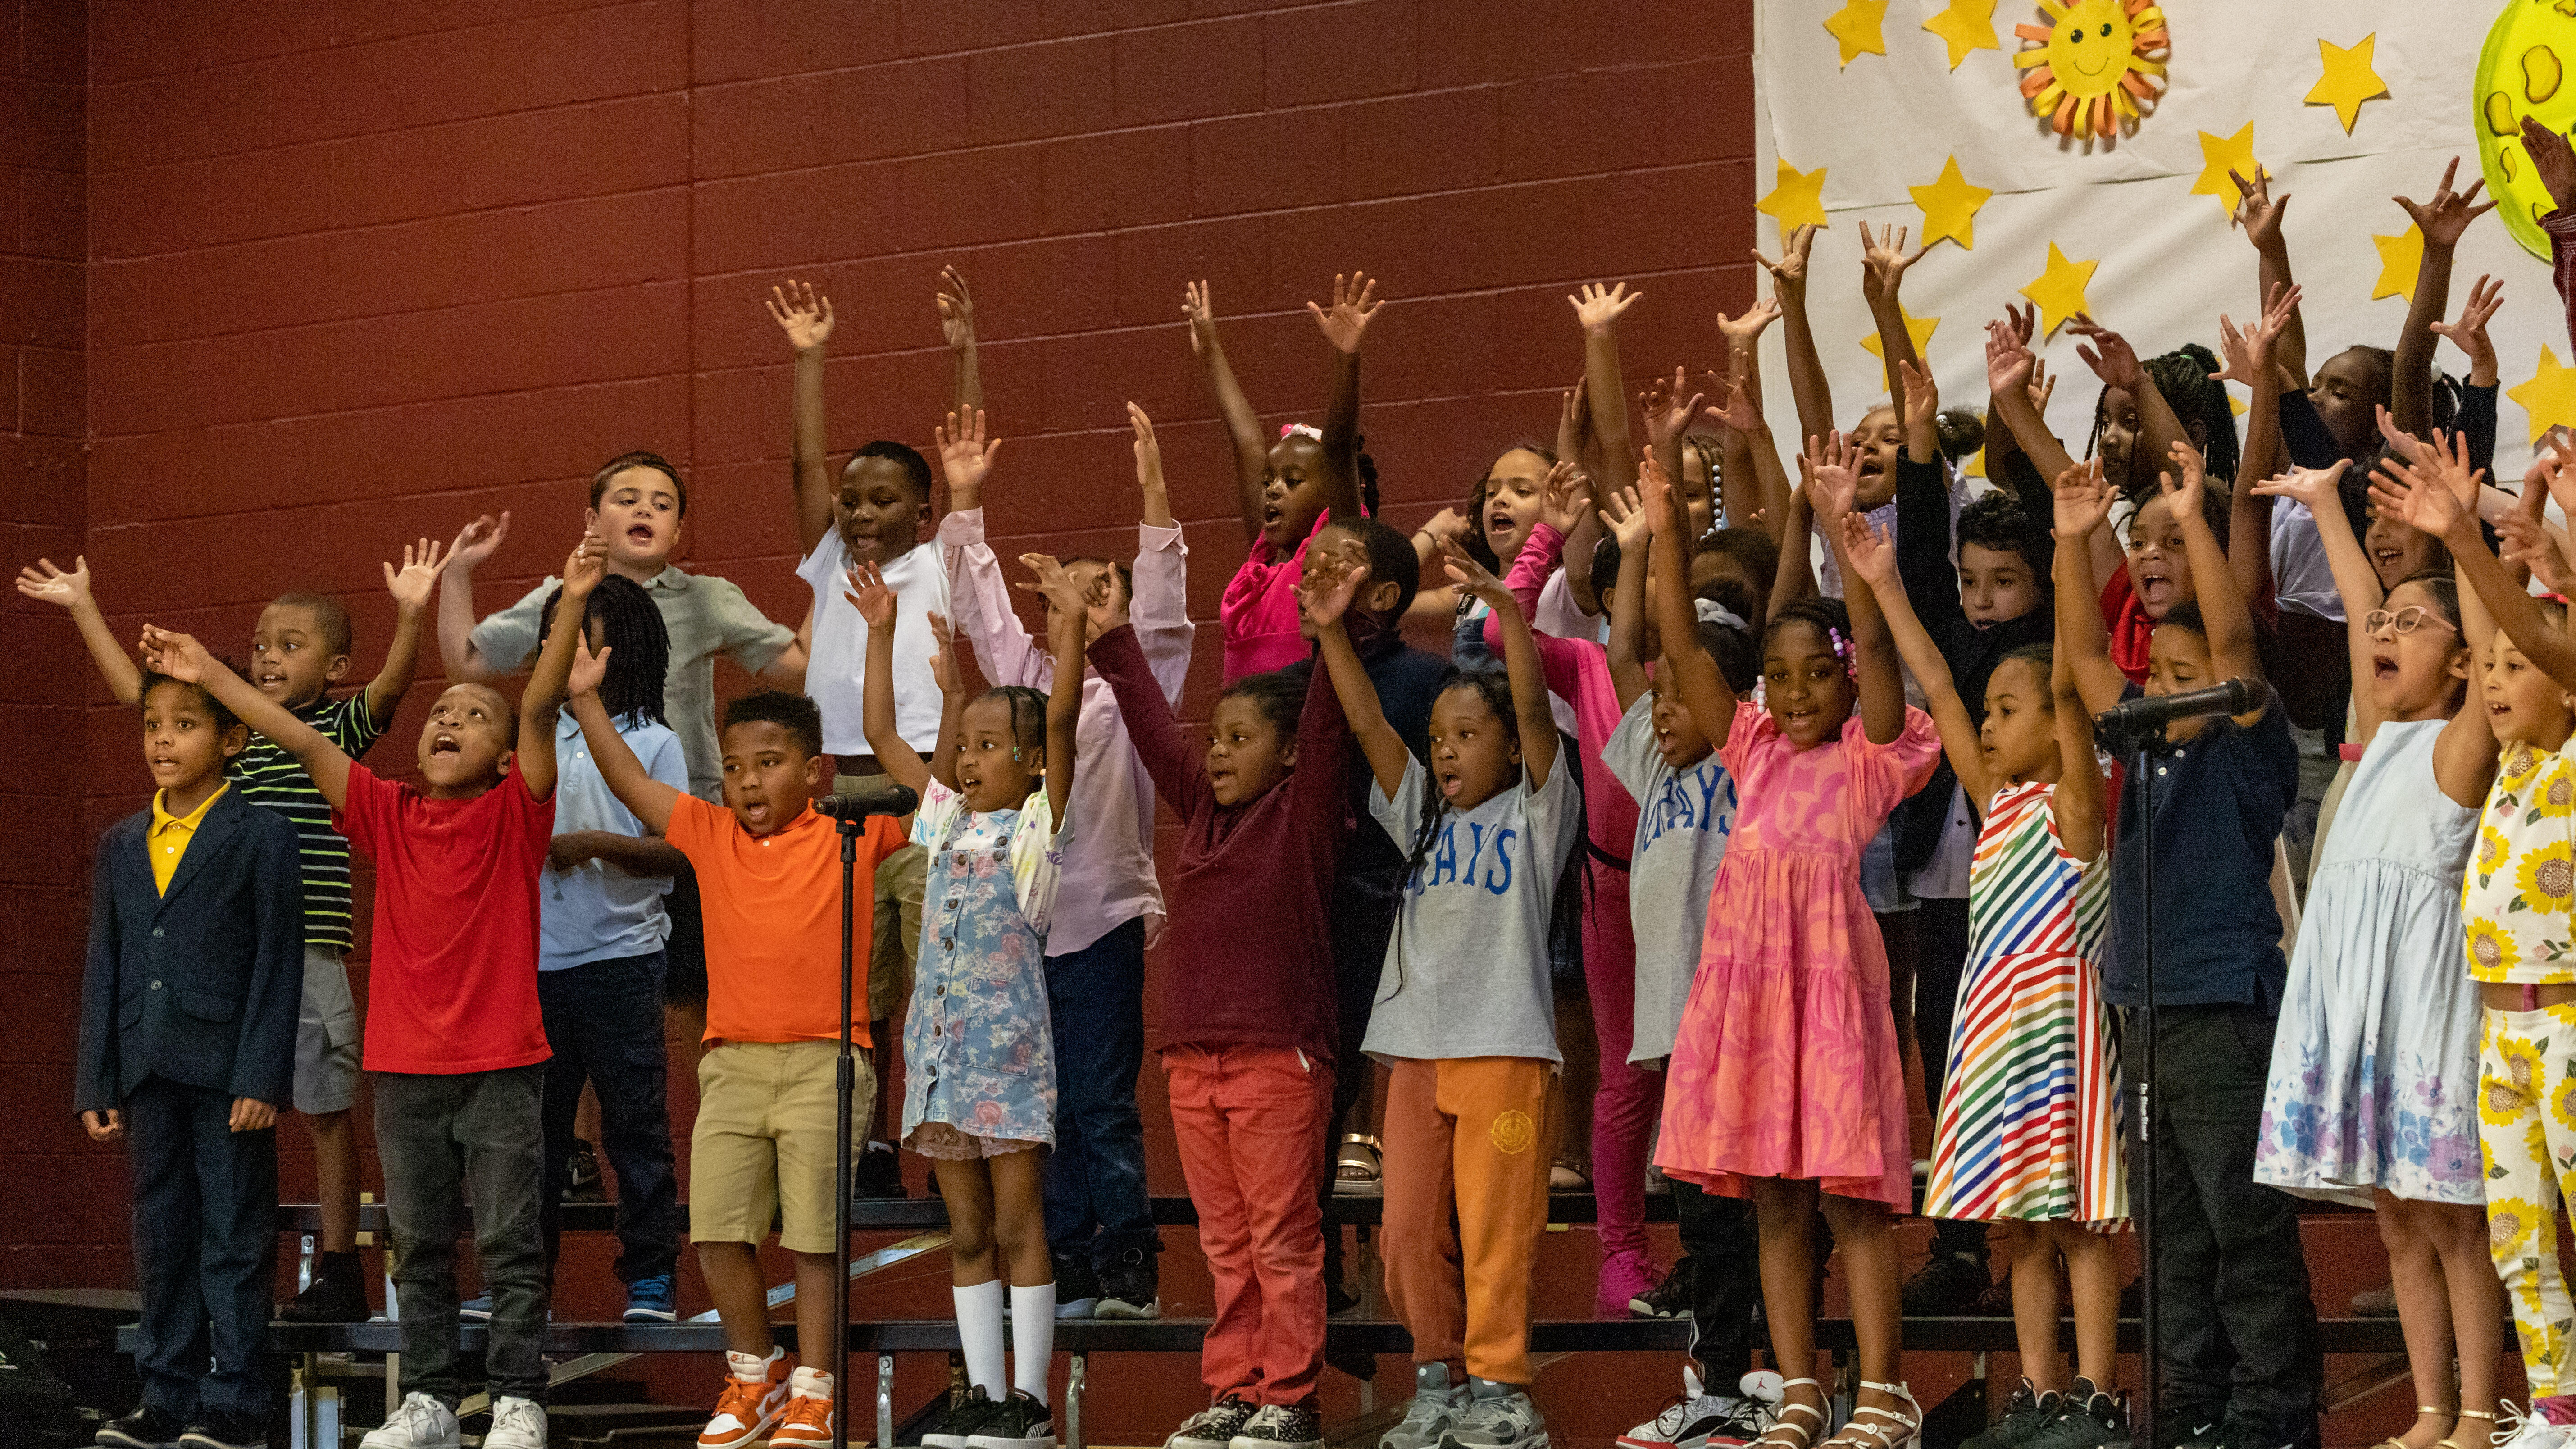 Barrett students bring some feel-good vibes with "Music in the Valley" show